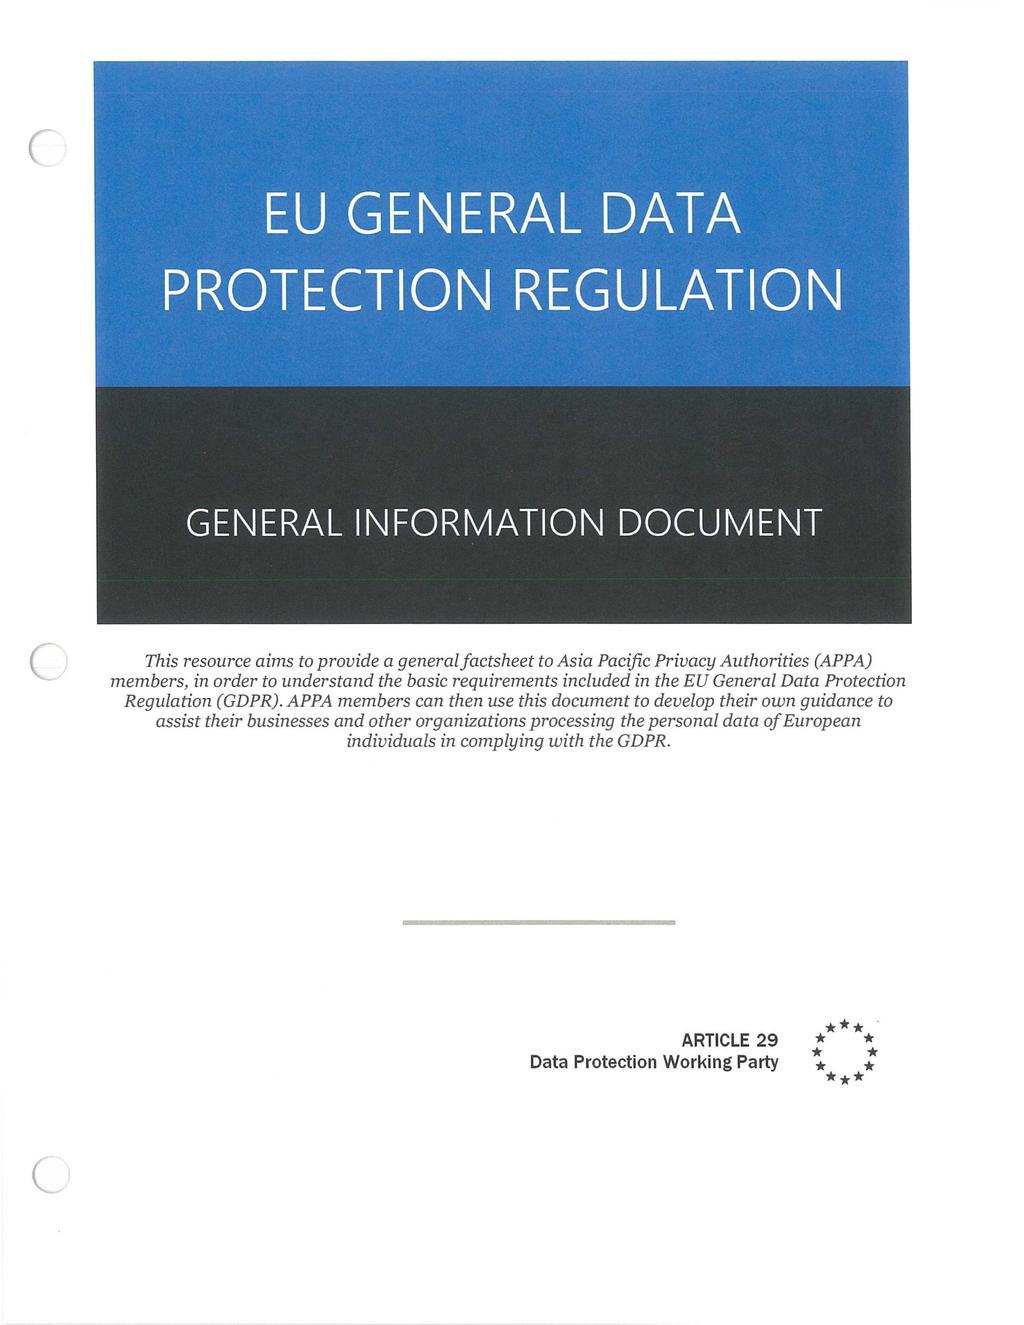 EU GENERAL DATA PROTECTION REGULATION GENERAL INFORMATION DOCUMENT This resource aims to provide a general factsheet to Asia Pacific Privacy Authorities (APPA) members, in order to understand the